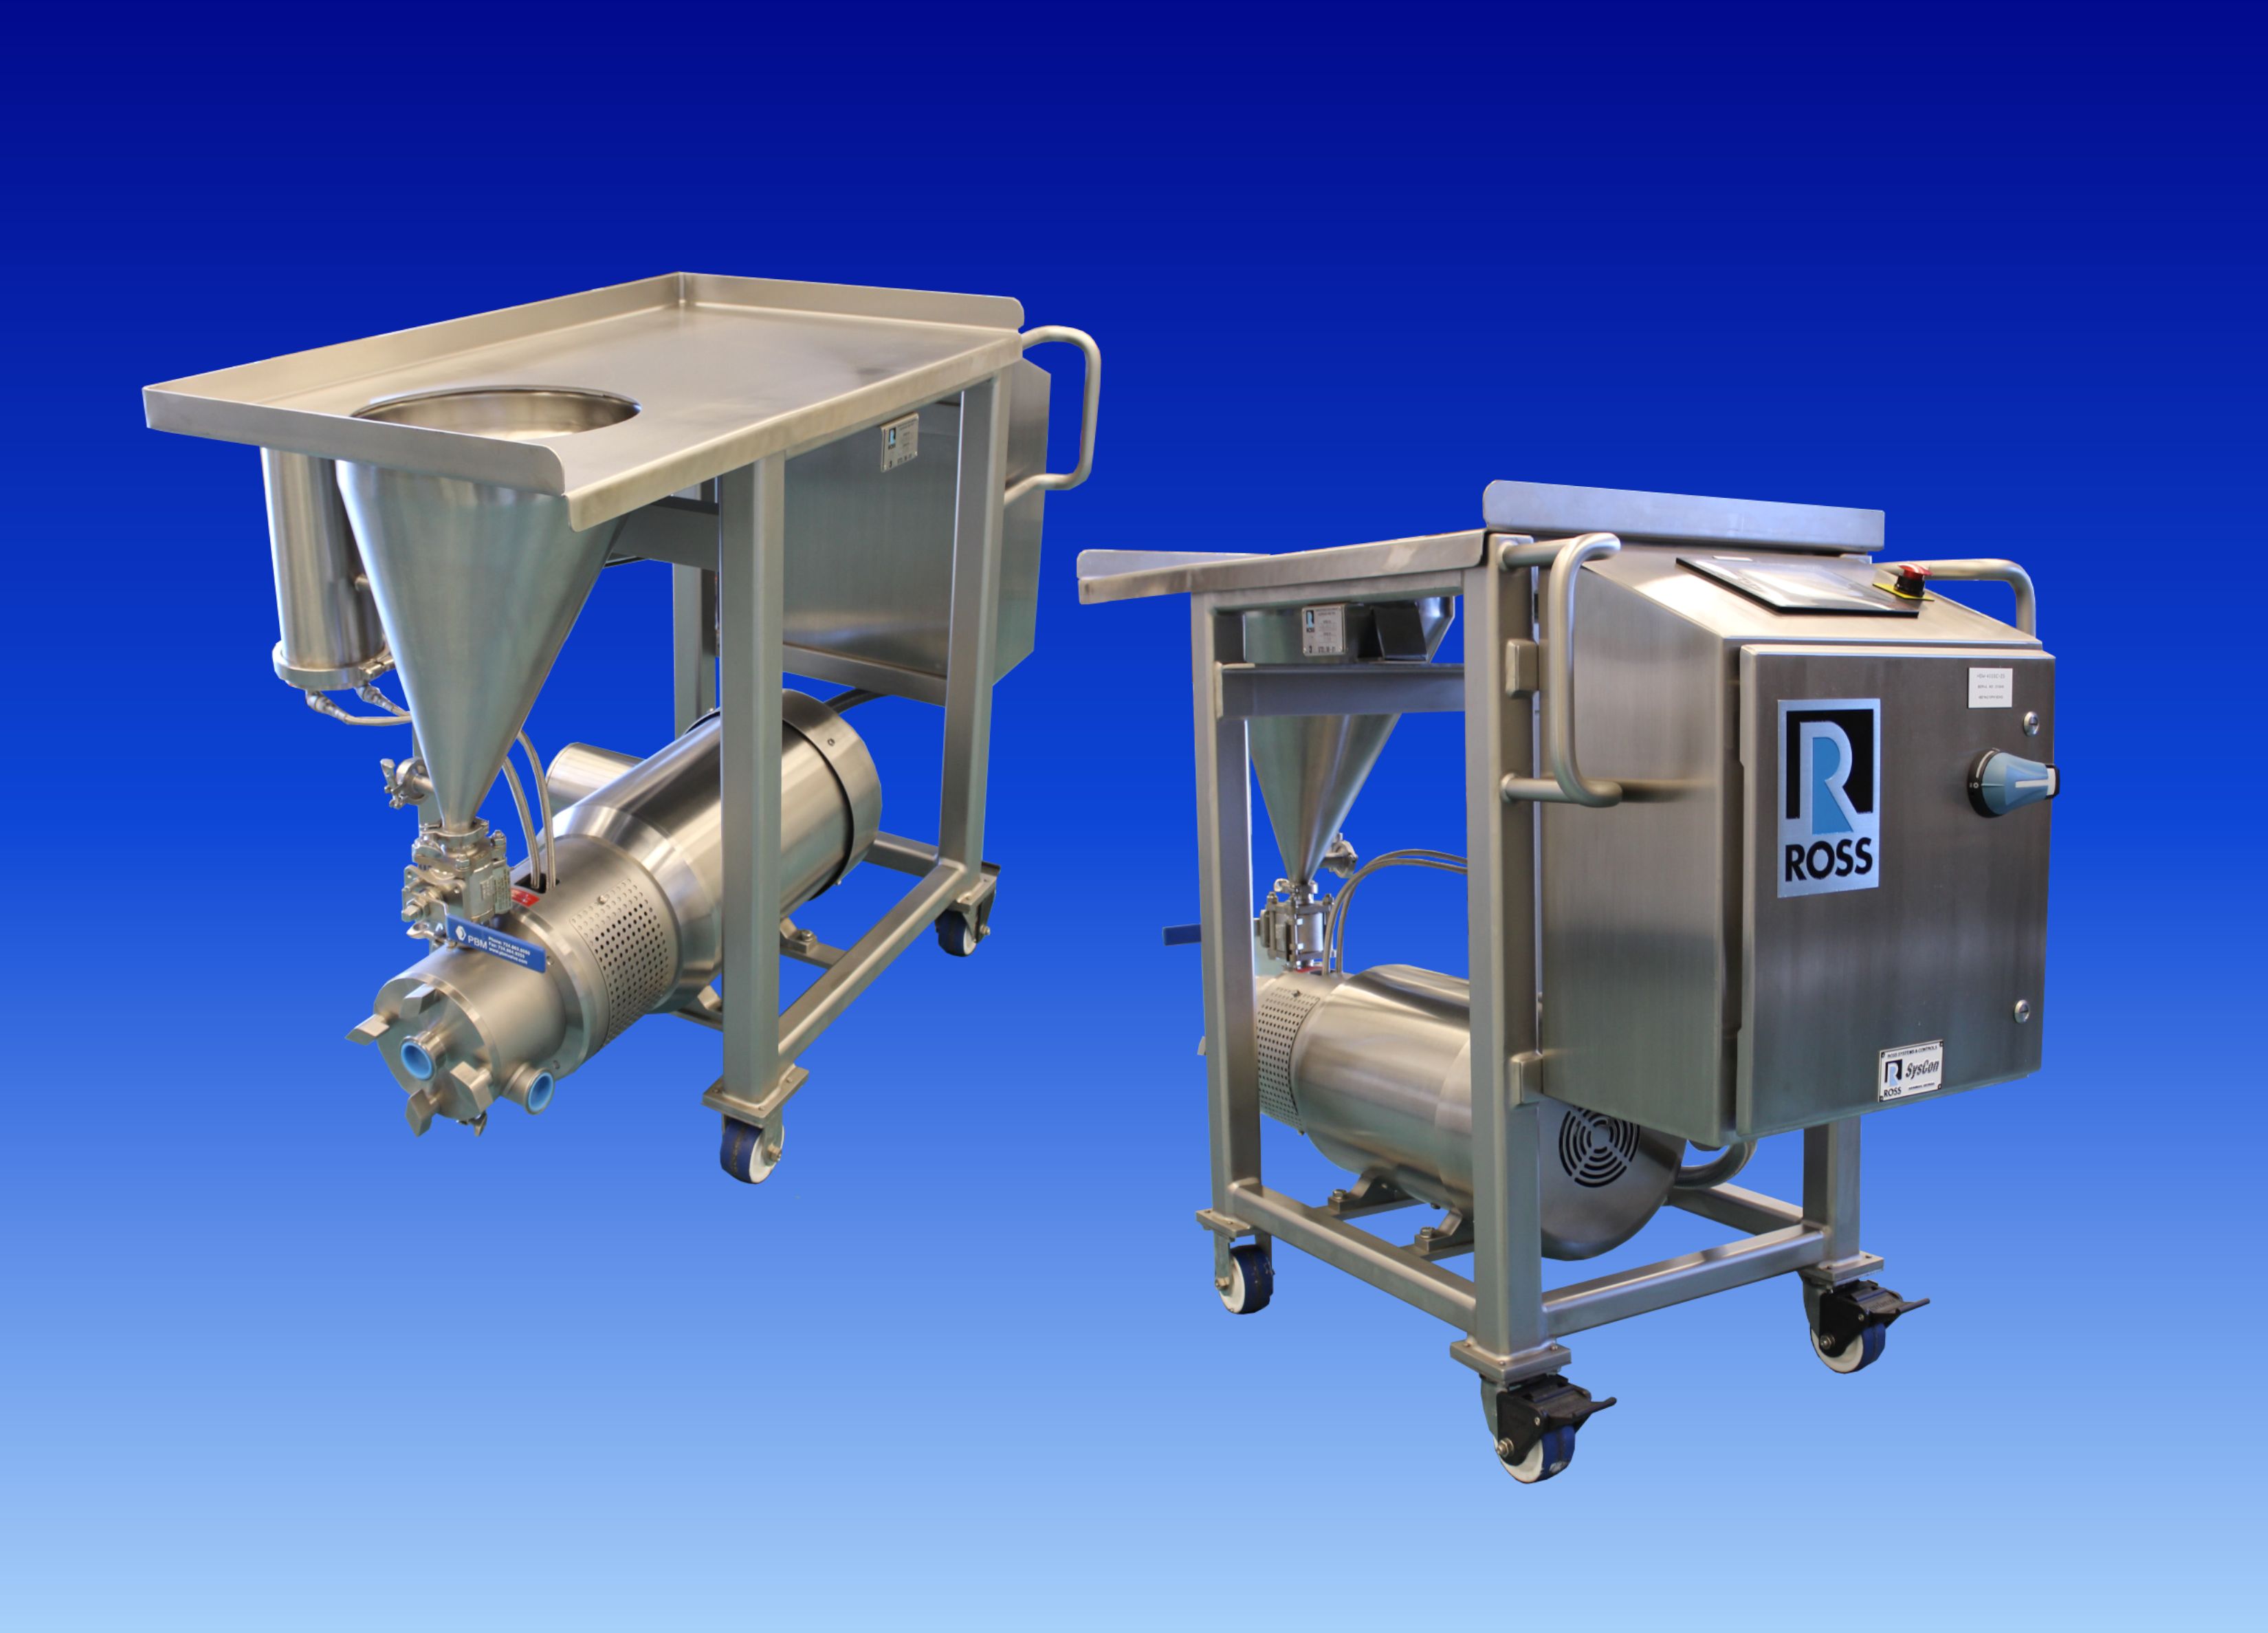 A 25HP Inline SLIM Mixer with built-in control panel mounted on a portable cart.